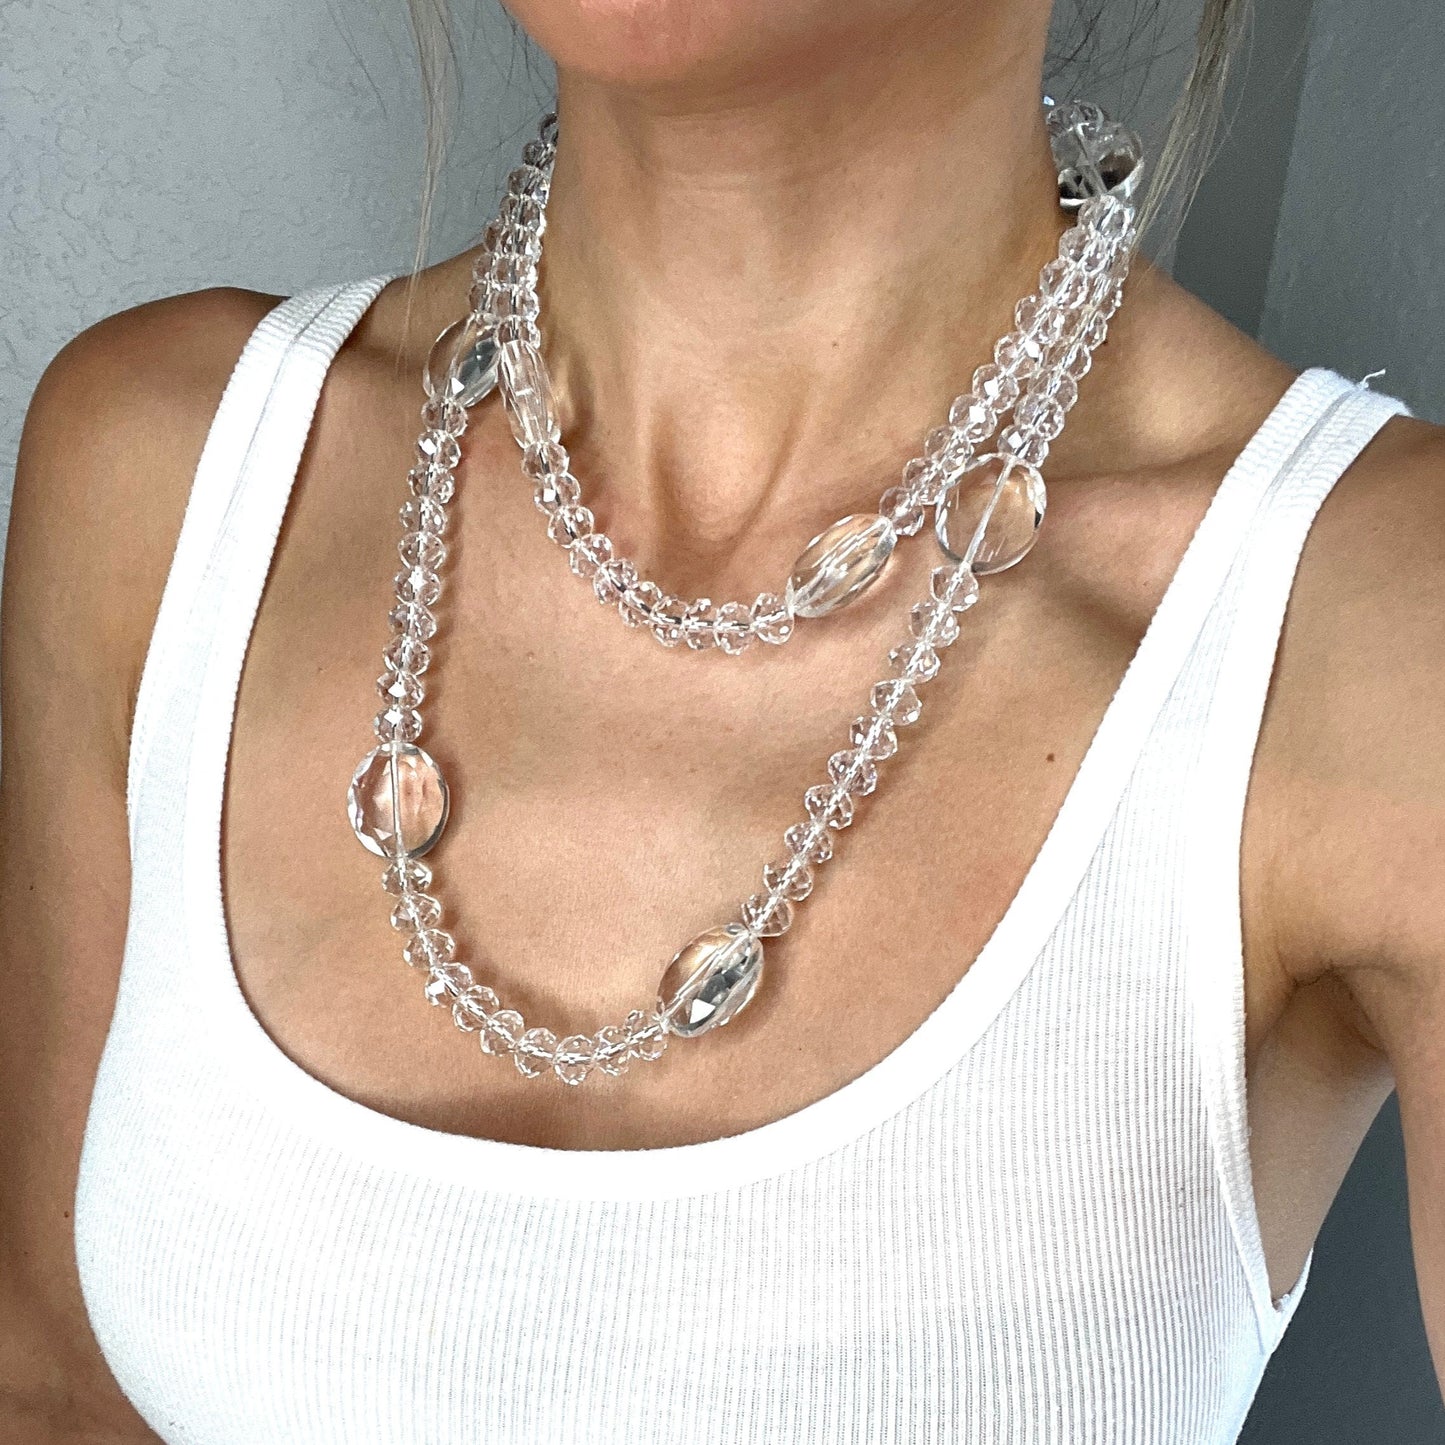 Long Clear Crystal Bead Necklace - Born To Glam